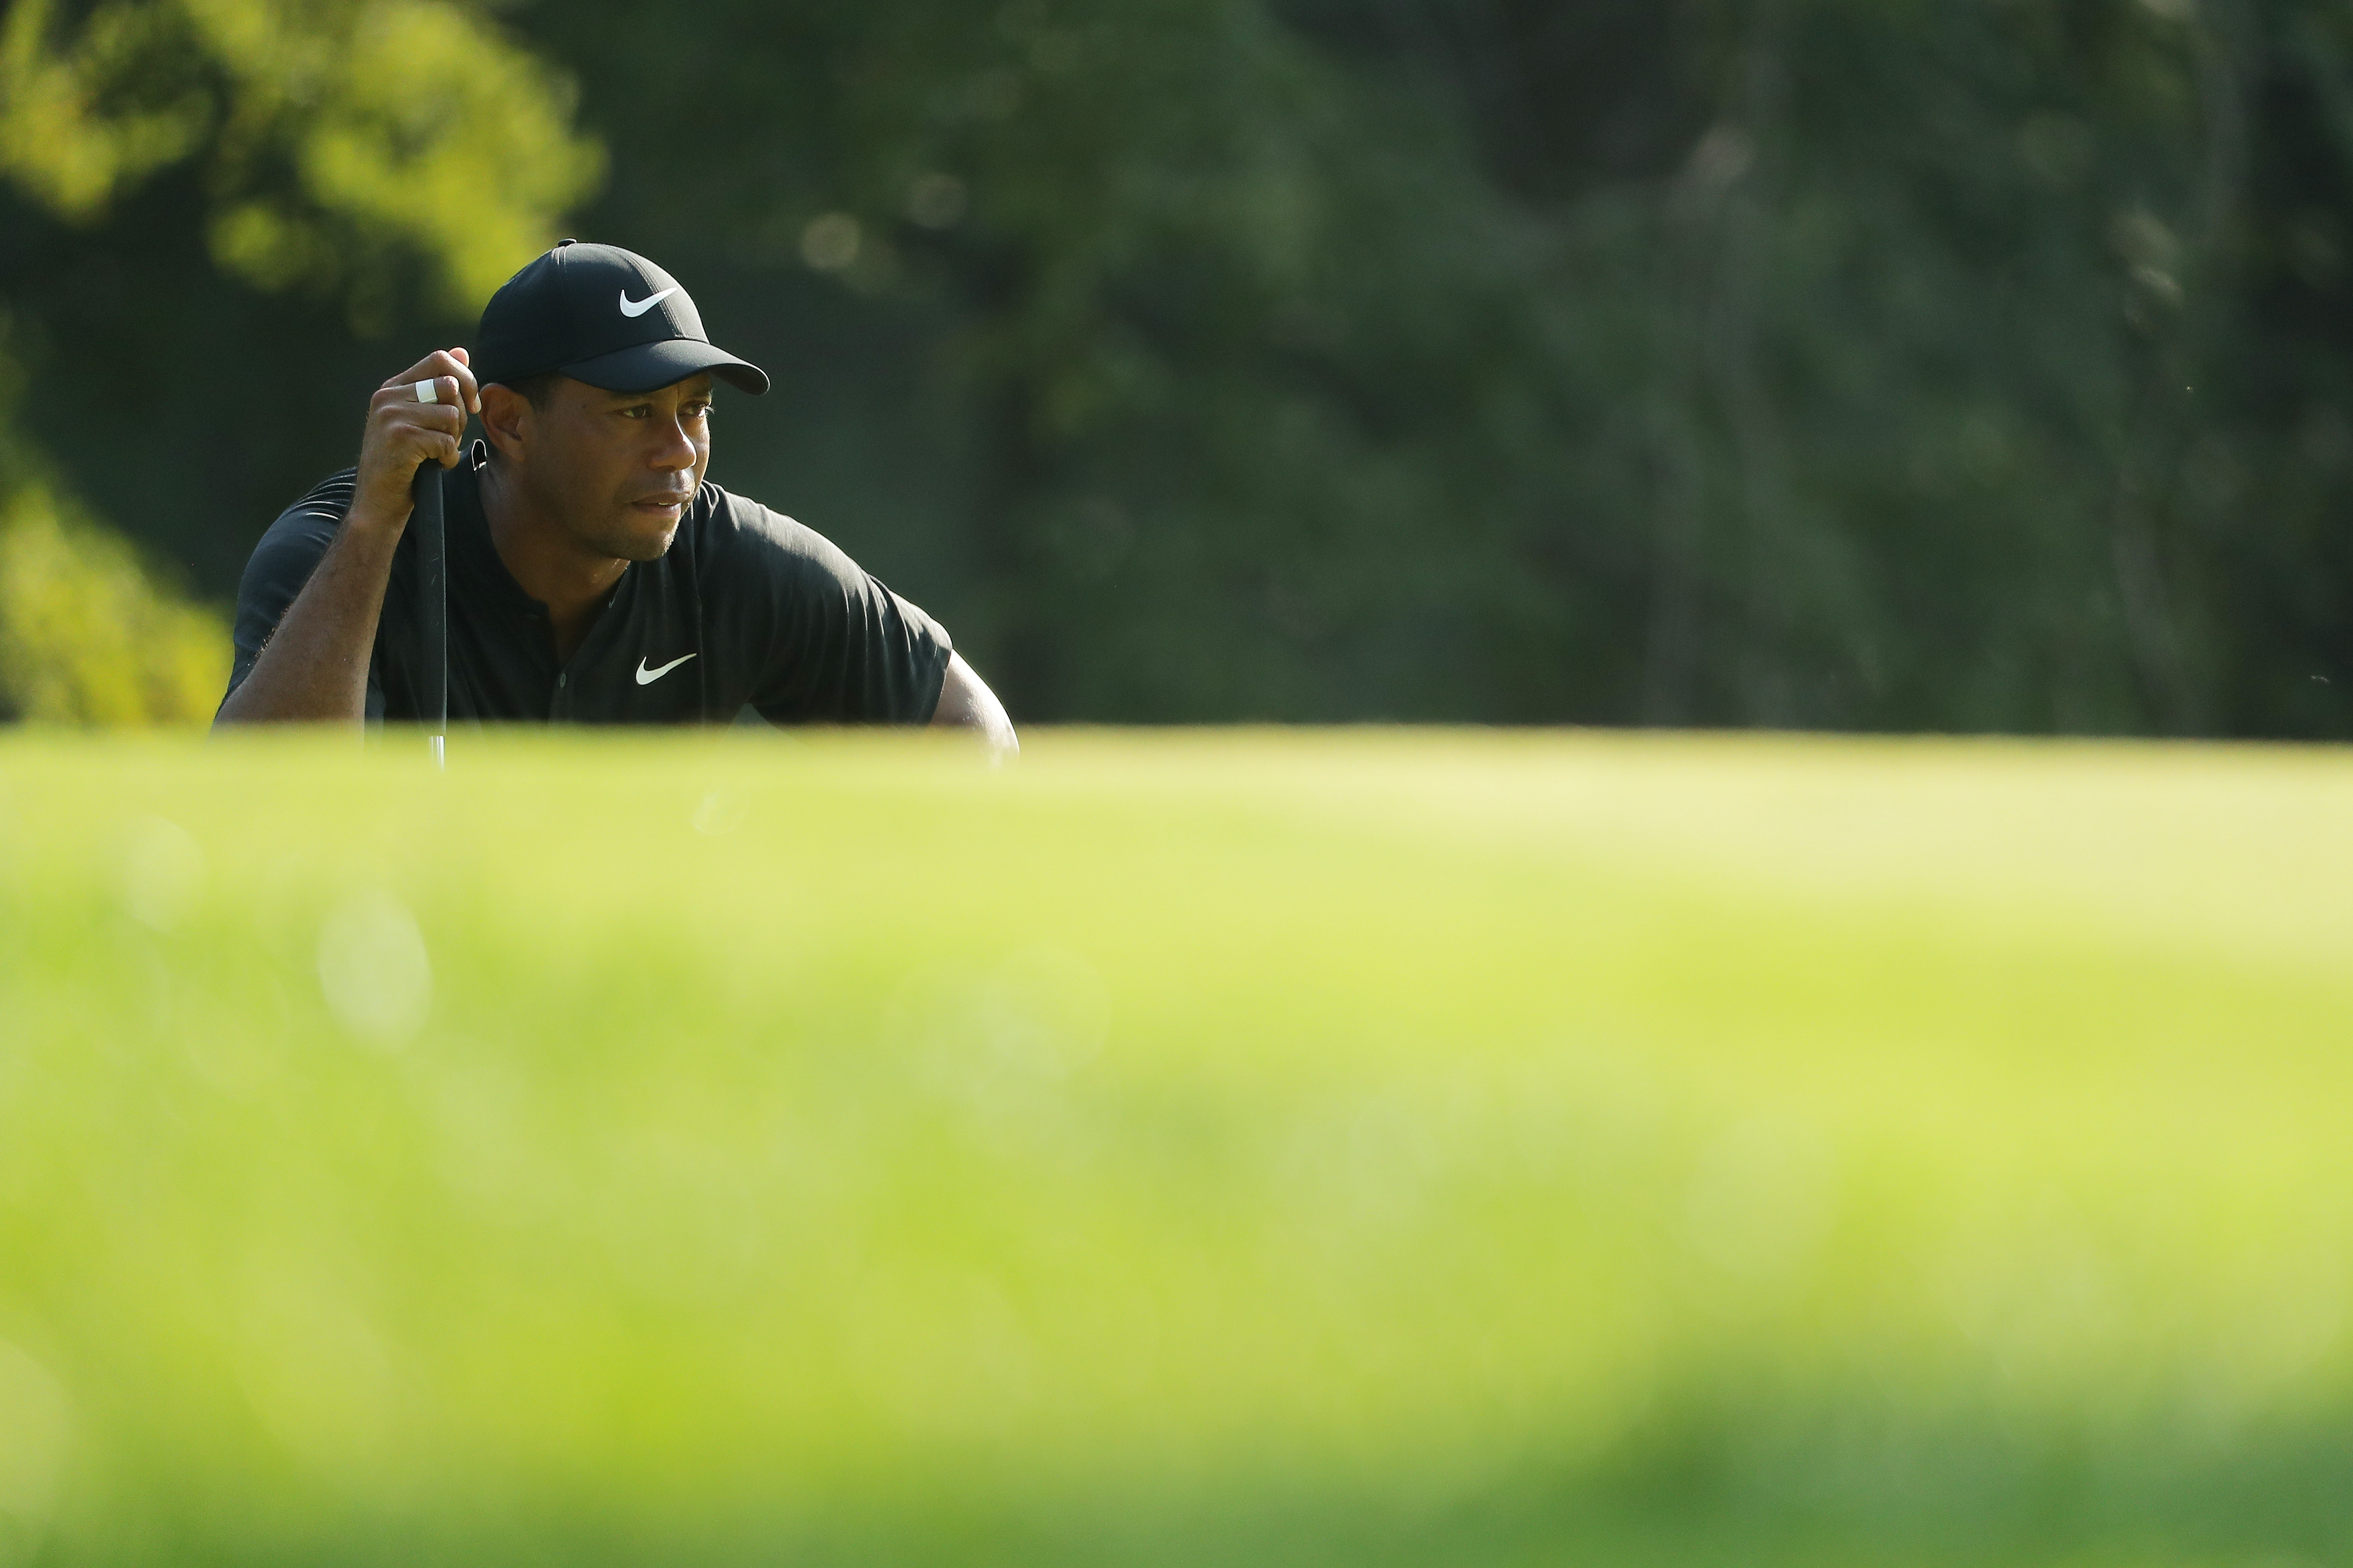 Tiger Woods shot 66 at the PGA Championship to chase a 15th major and a possible Ryder Cup spot